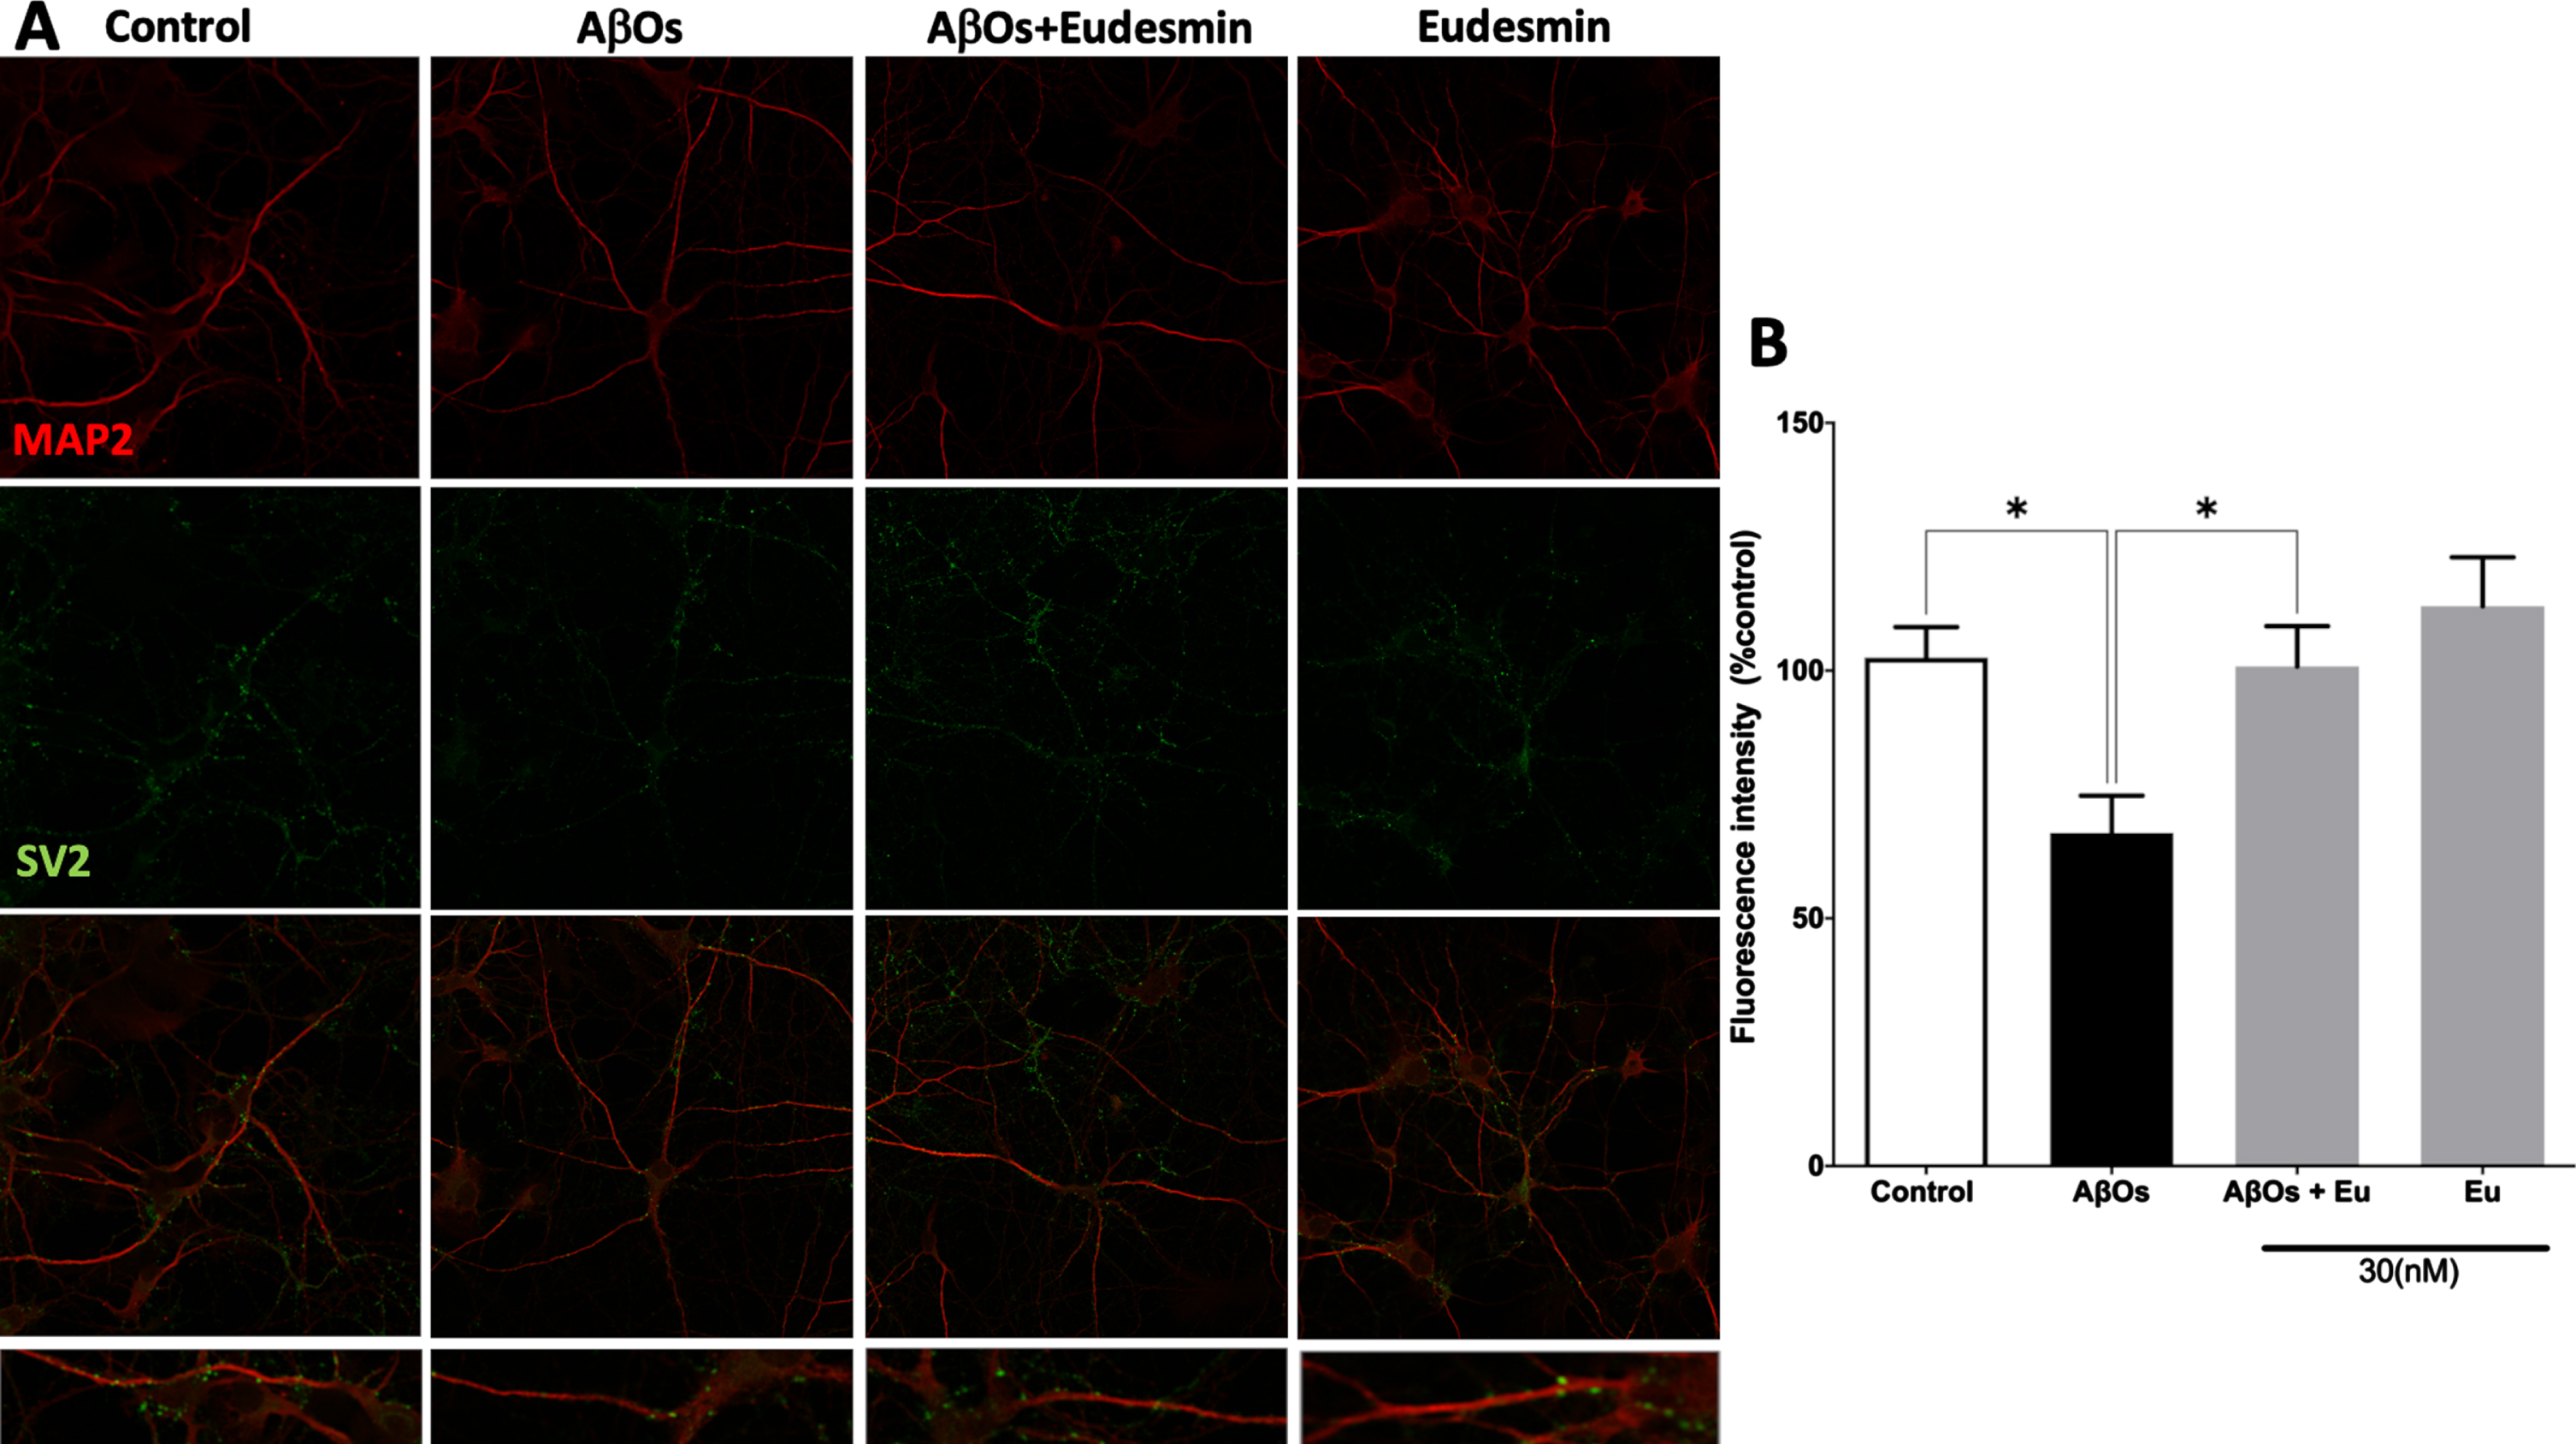 Neuroprotective effect of Eudesmin on synaptic markers. Immunofluorescence confocal images of hippocampal neurons co-incubated for 24 h with AβOs (0.5μM) and Eudesmin (Eu 30 nM) to analyze MAP2 (red) and SV2 (green), a zoom of each treatment was represented (A). Quantification of total fluorescence SV2 intensity was measured using Image J software (B). Values are expressed as the percentage of the control group (without AβOs treatment). Values are mean±SEM, n = 3 using one-way ANOVA and Bonferroni test. *p < 0.05.